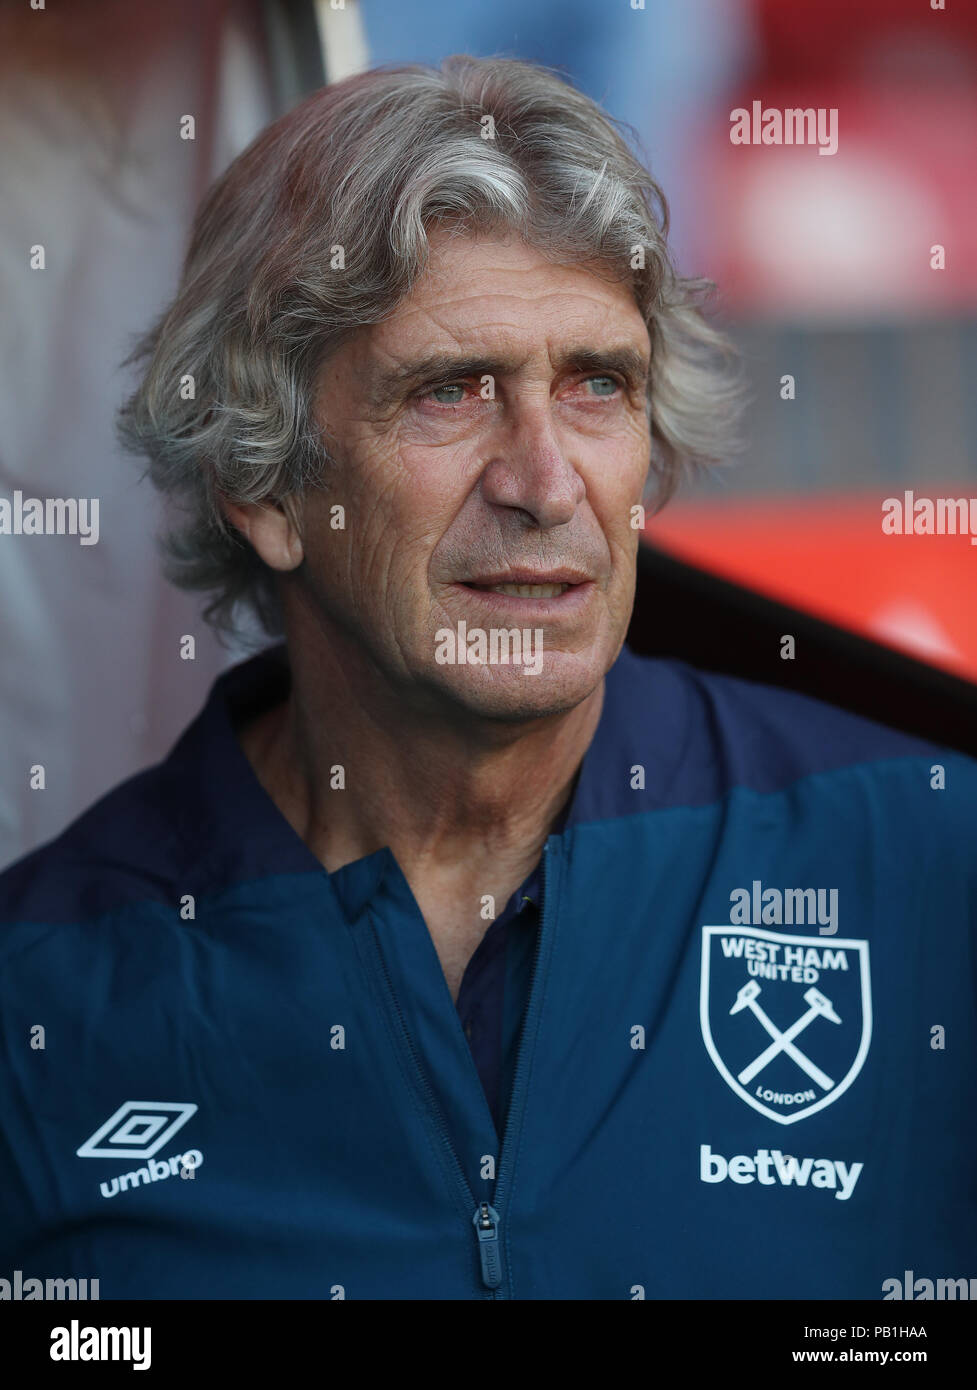 West Ham manager Manuel Pellegrini during a pre season friendly match at Villa Park, Birmingham. PRESS ASSOCIATION Photo. Picture date: Wednesday July 25, 2018. Photo credit should read: David Davies/PA Wire. No use with unauthorised audio, video, data, fixture lists, club/league logos or 'live' services. Online in-match use limited to 75 images, no video emulation. No use in betting, games or single club/league/player publications. Stock Photo